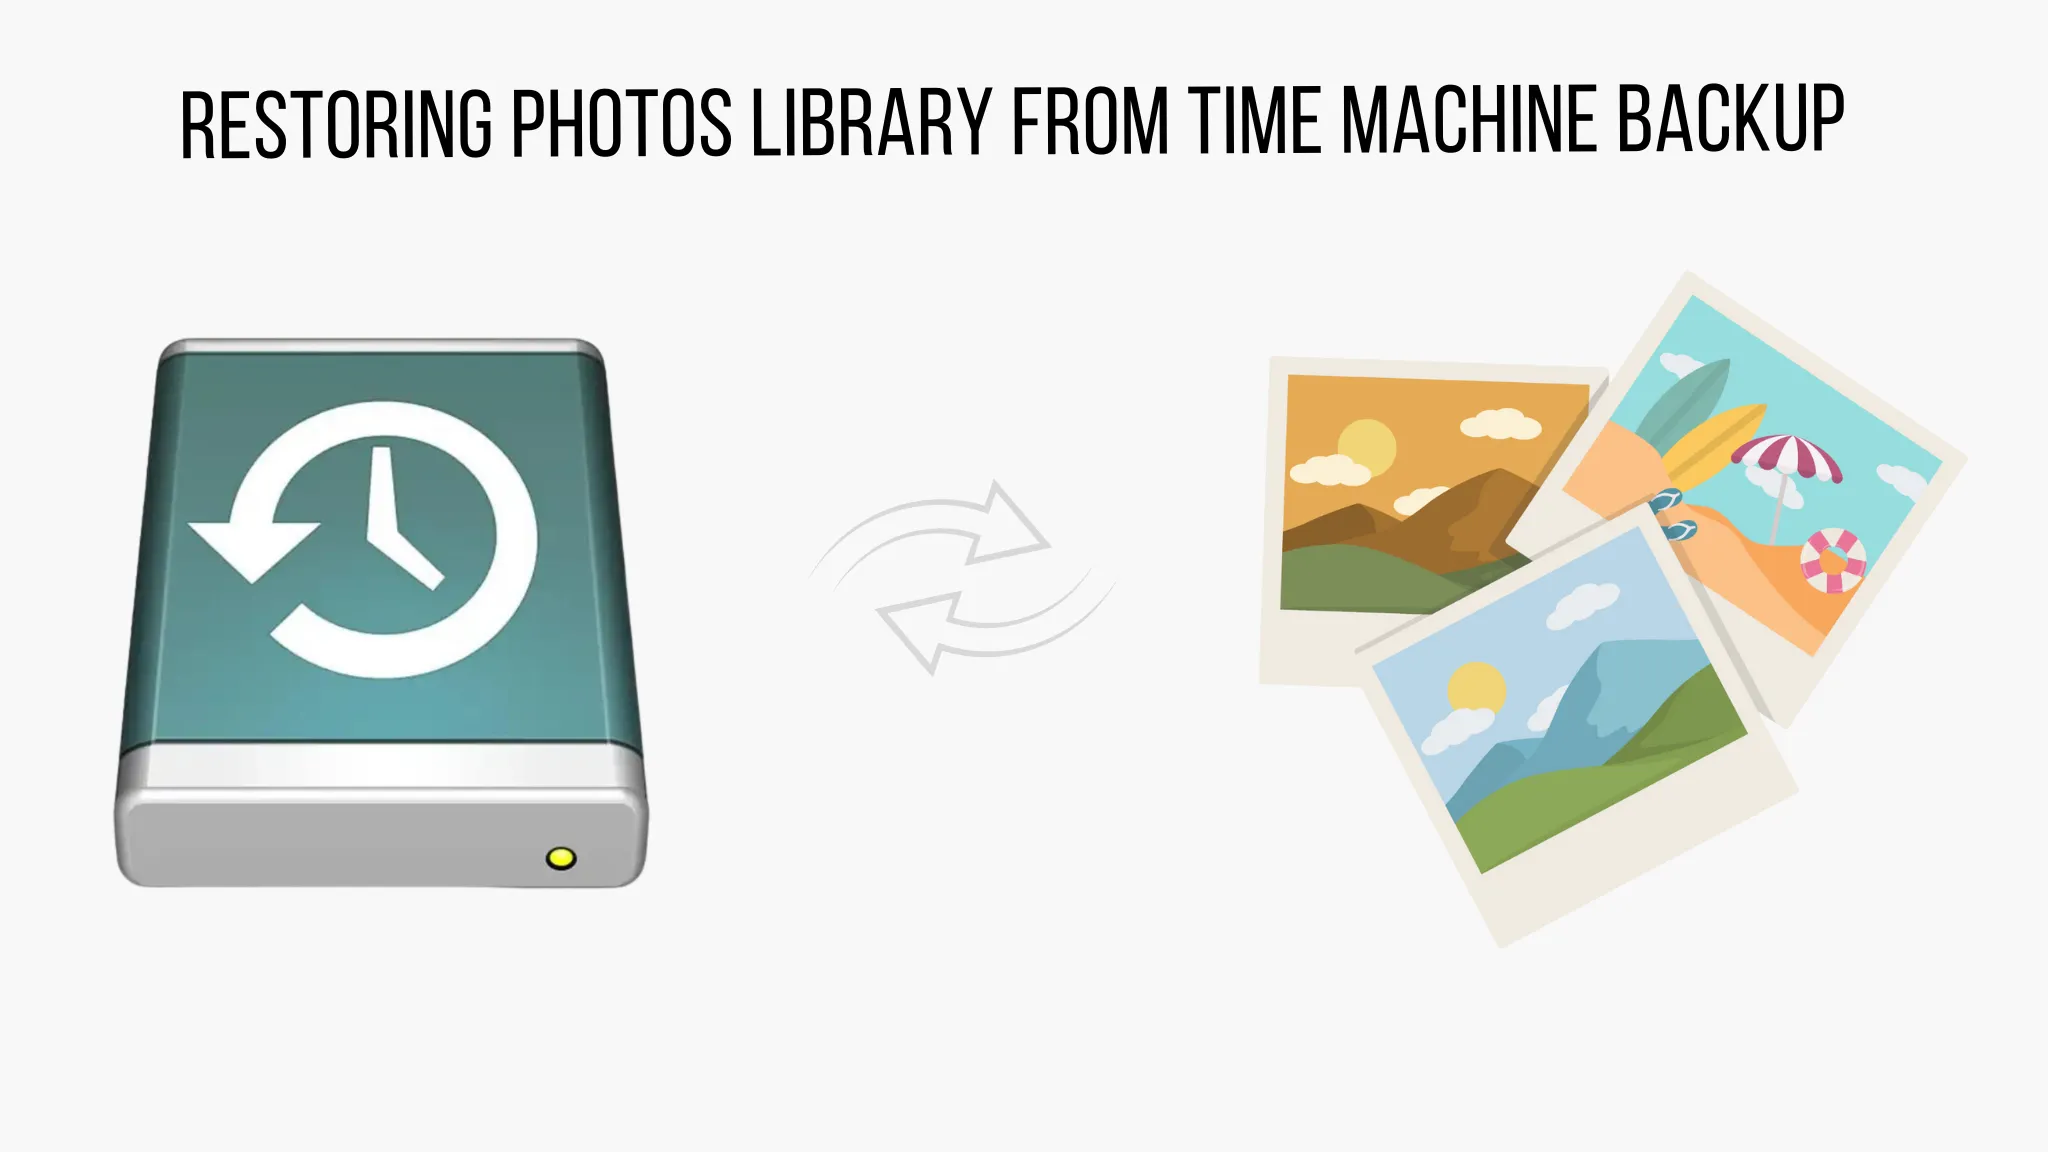 Restoring Photos Library from Time Machine Backup